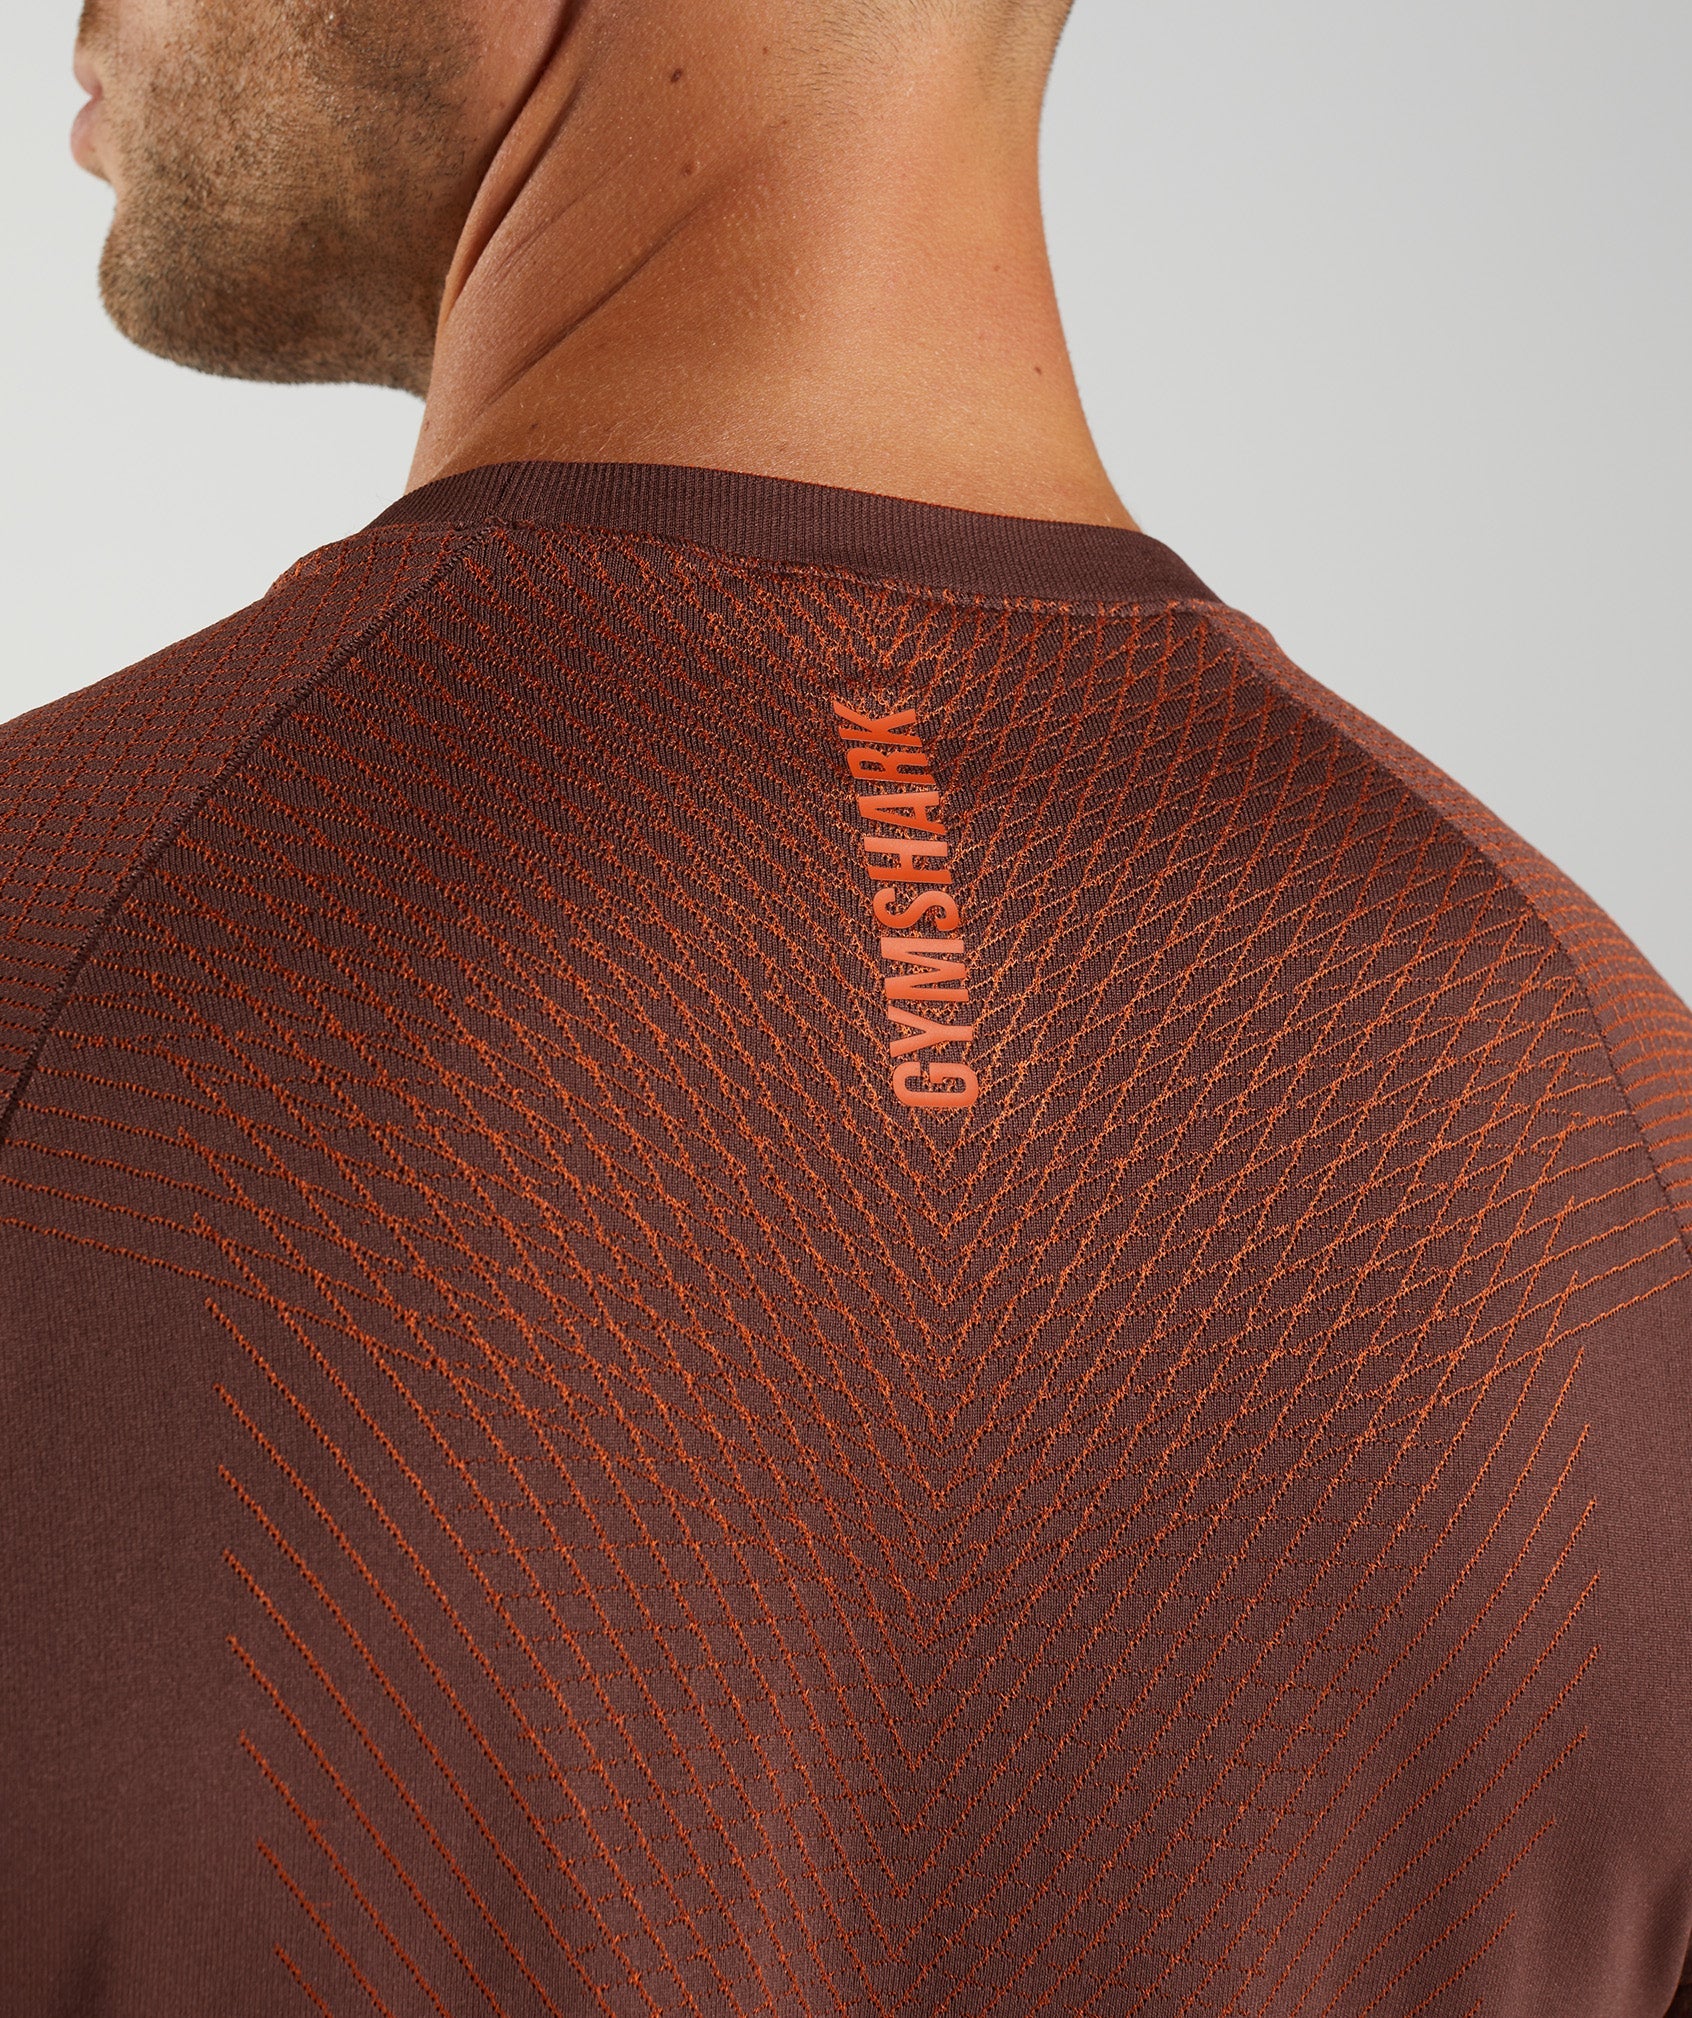 Apex Seamless T-Shirt in Cherry Brown/Pepper Red - view 5